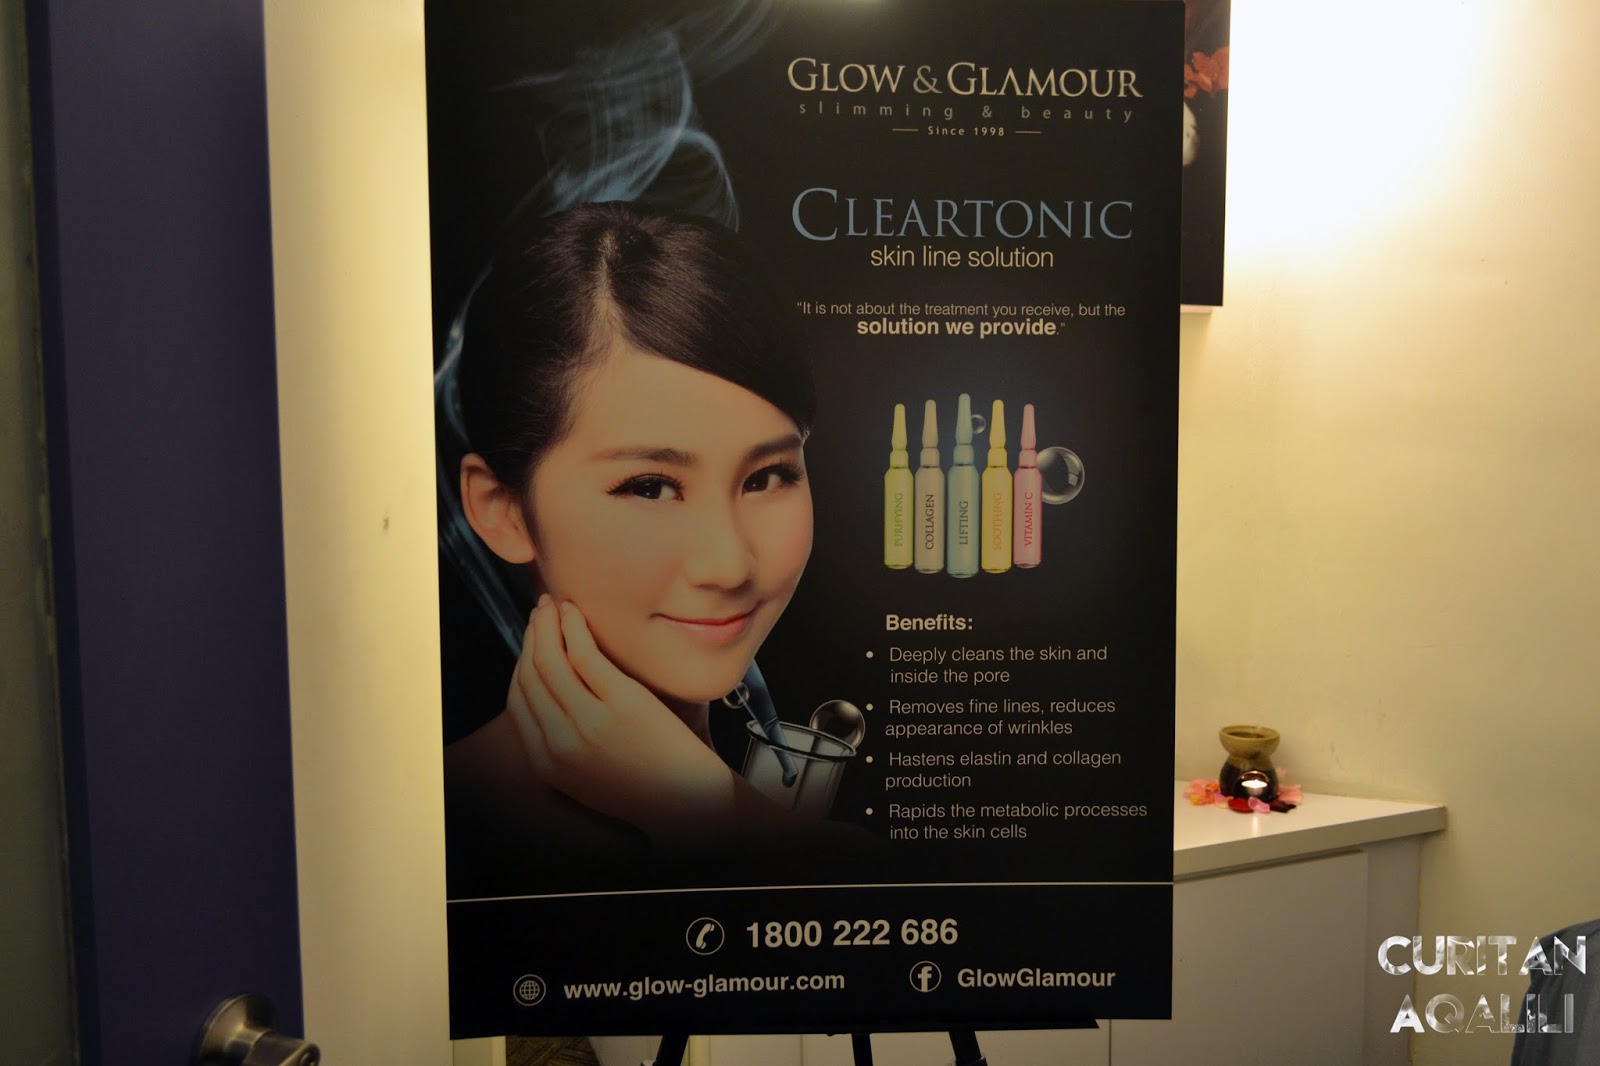 glow glamour slimming beauty